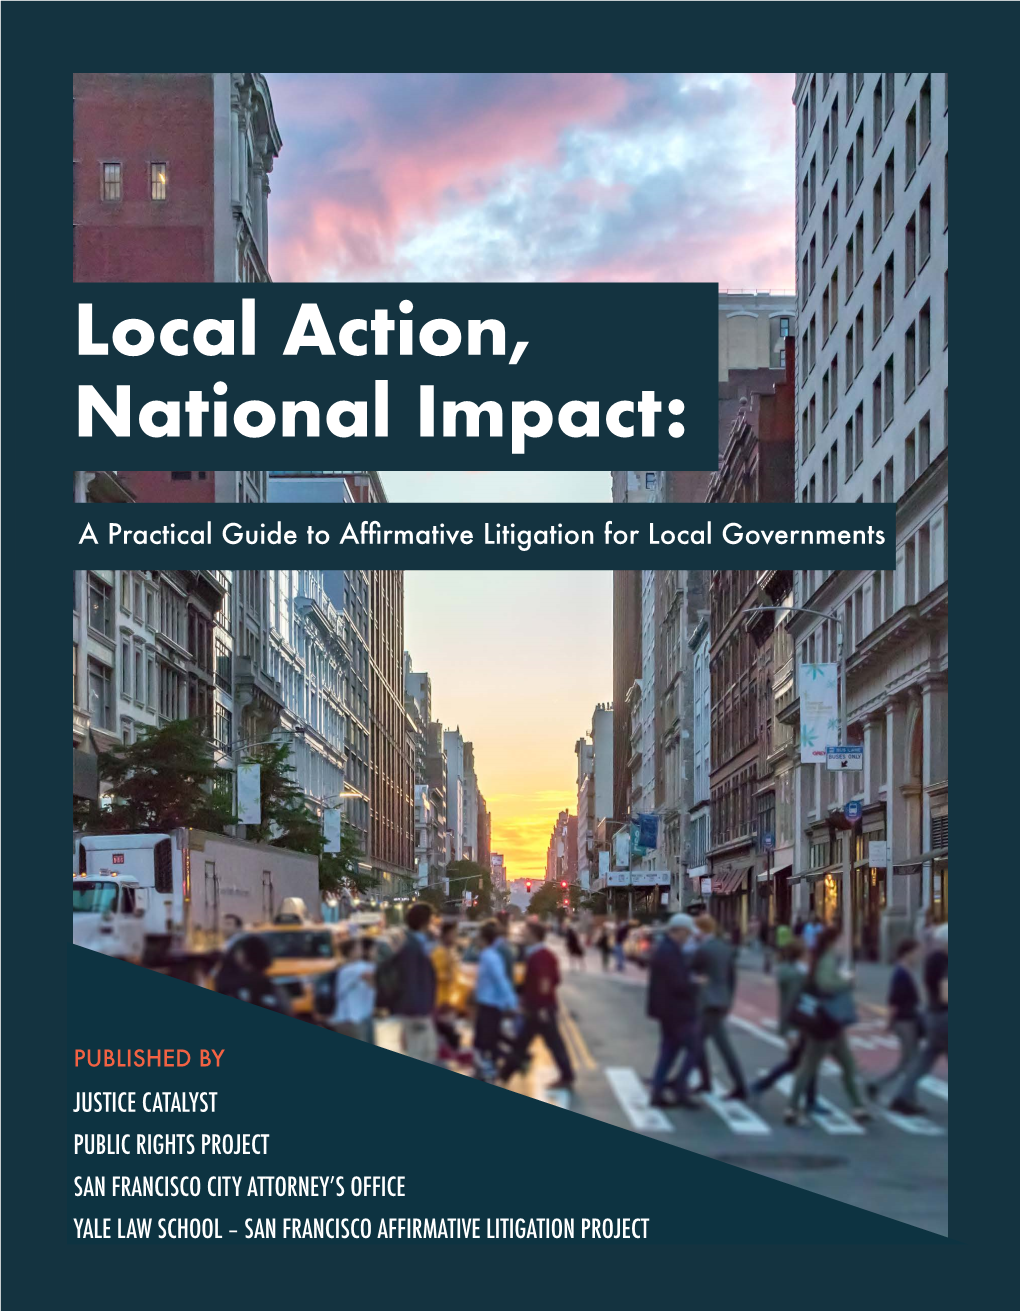 Local Action, National Impact: a Practical Guide to Affirmative